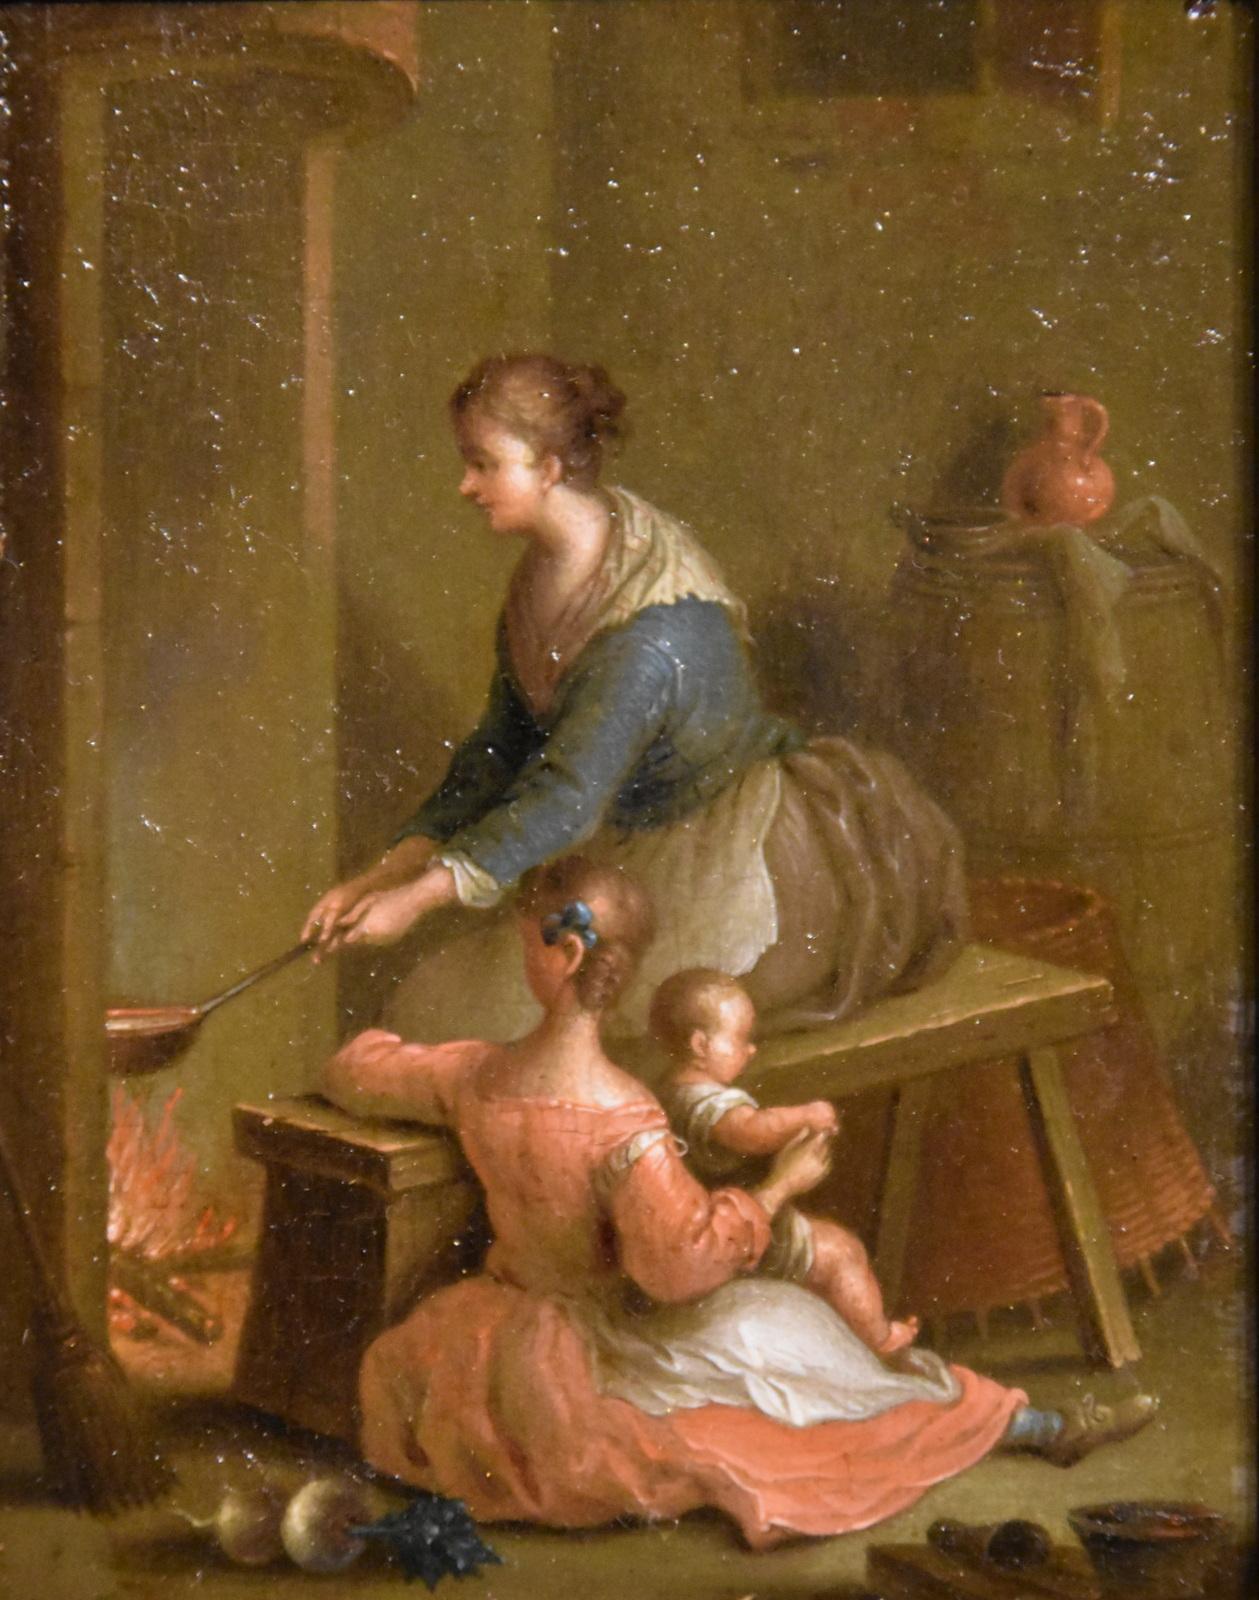 Oil Painting by Jean-Baptiste Simeon Chardin “Children Playing and “Ladies Cooking” . Fine quality interior scenes from the mid 19th century. Both oil on panel in fine original frames.

Dimensions unframed 5 x 4
Dimensions framed10.5 x 9.5

All of